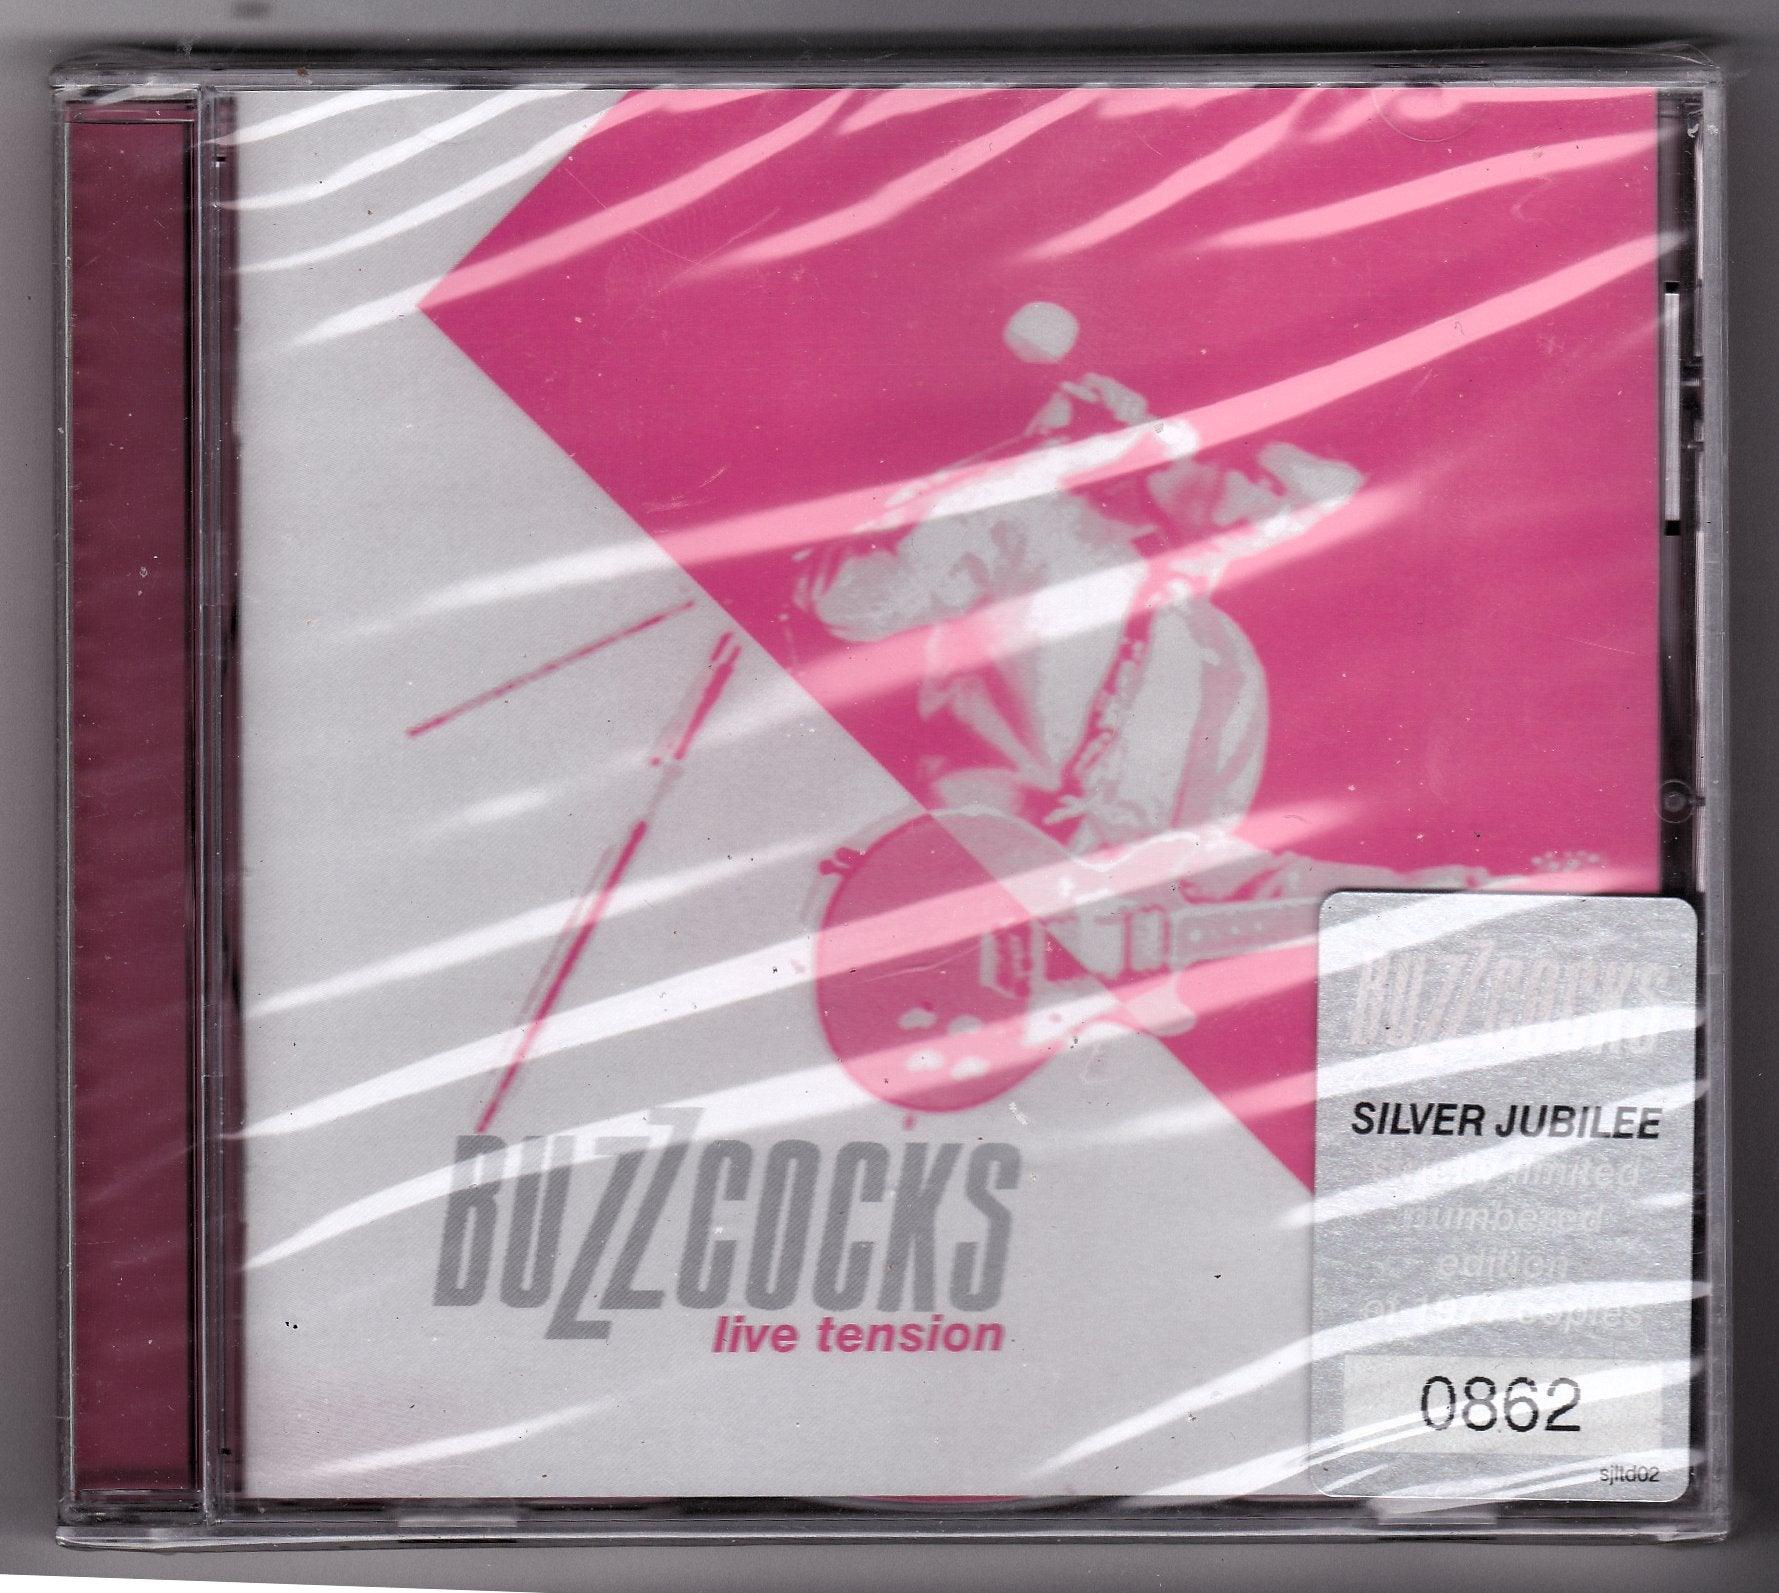 Buzzcocks Live Tension Silver Jubilee Limited Edition Punk CD 2002